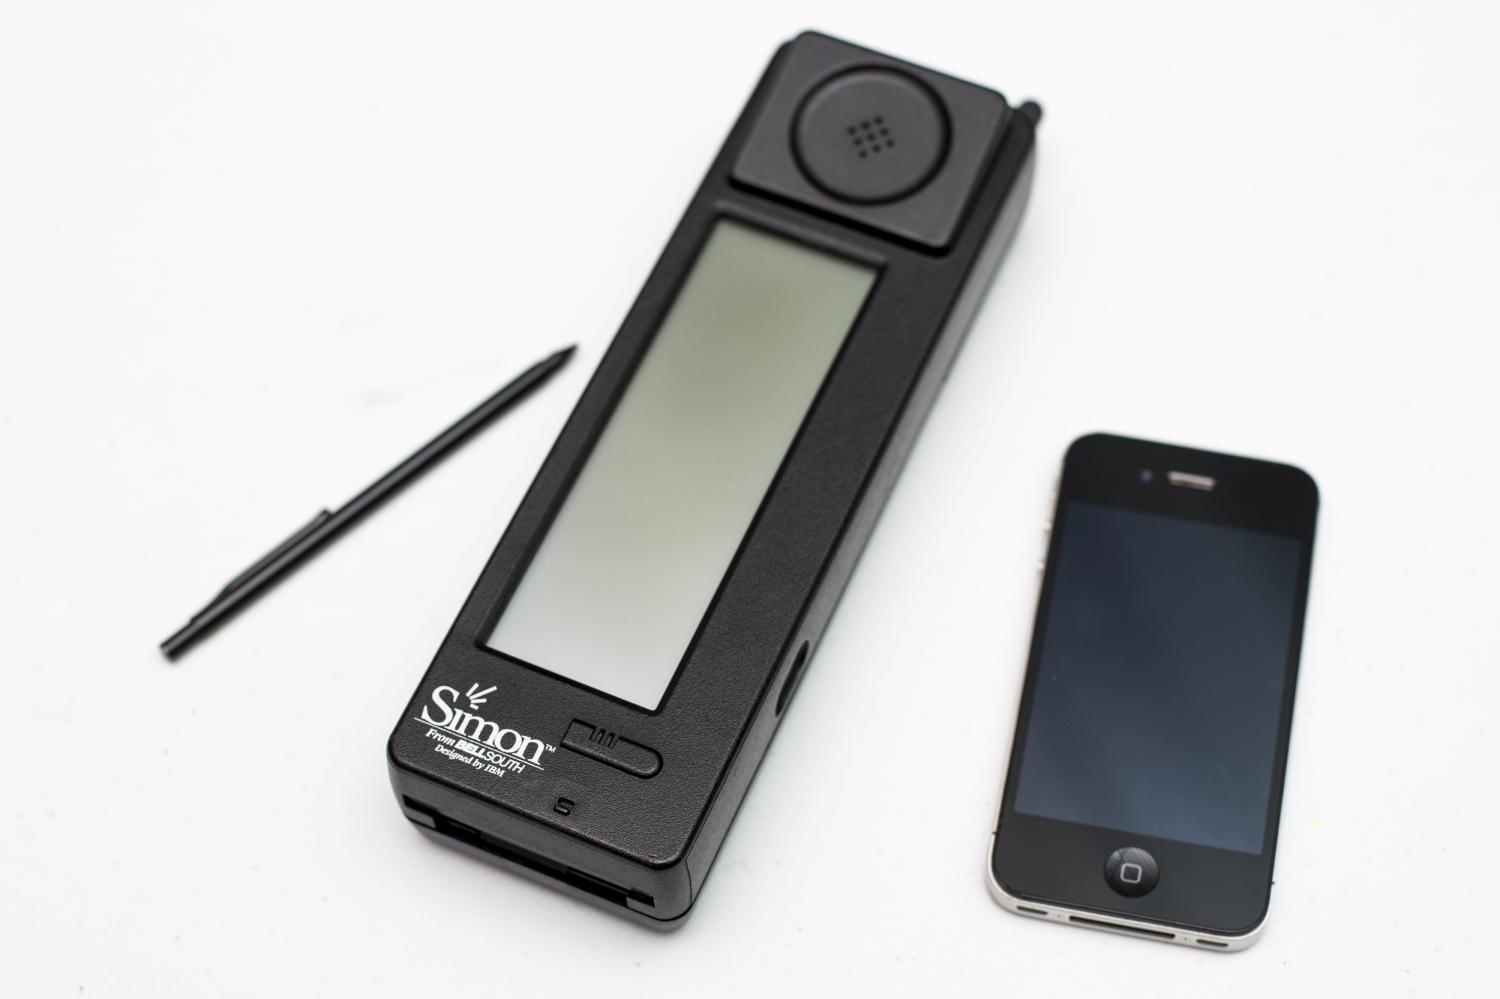 An original IBM Simon Personal Communicator is placed next to an Apple iPhone 4S at the Science Museum on August 15, 2014 in London, England (Rob Stothard / Getty Images)